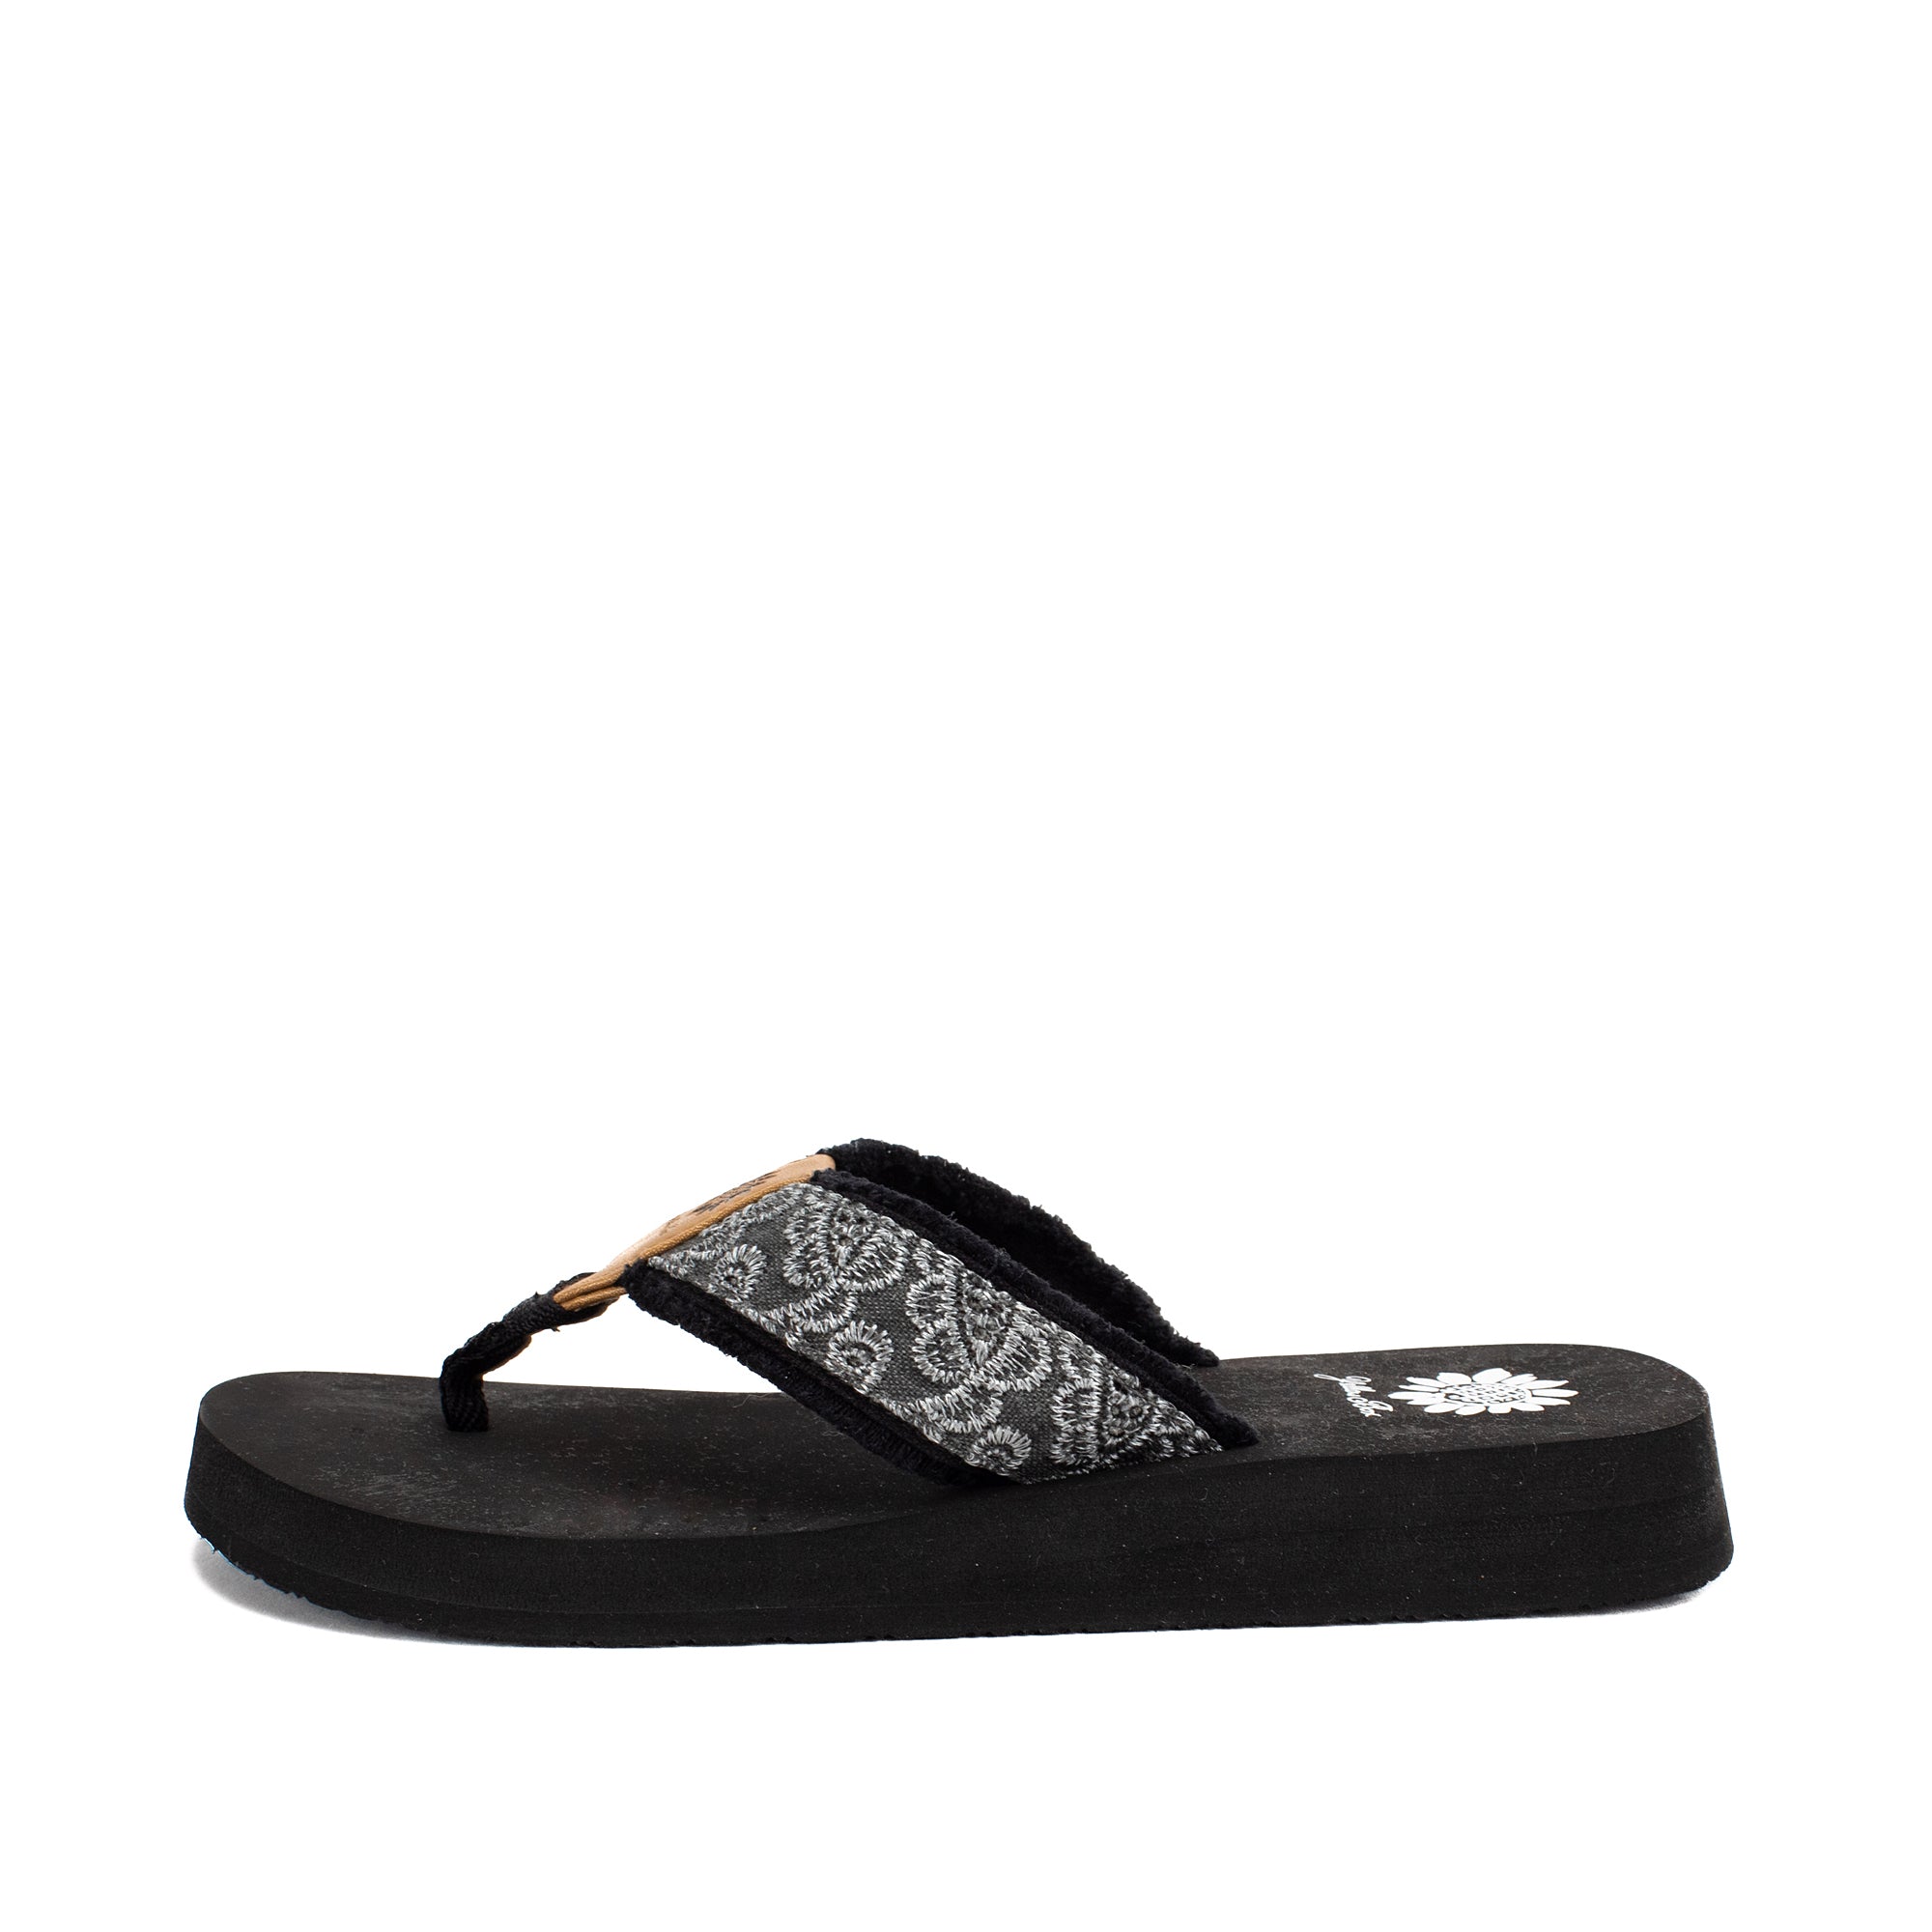 Yellow Box Flip Flops Floral Starburst Cut Out Shimmer Embossed